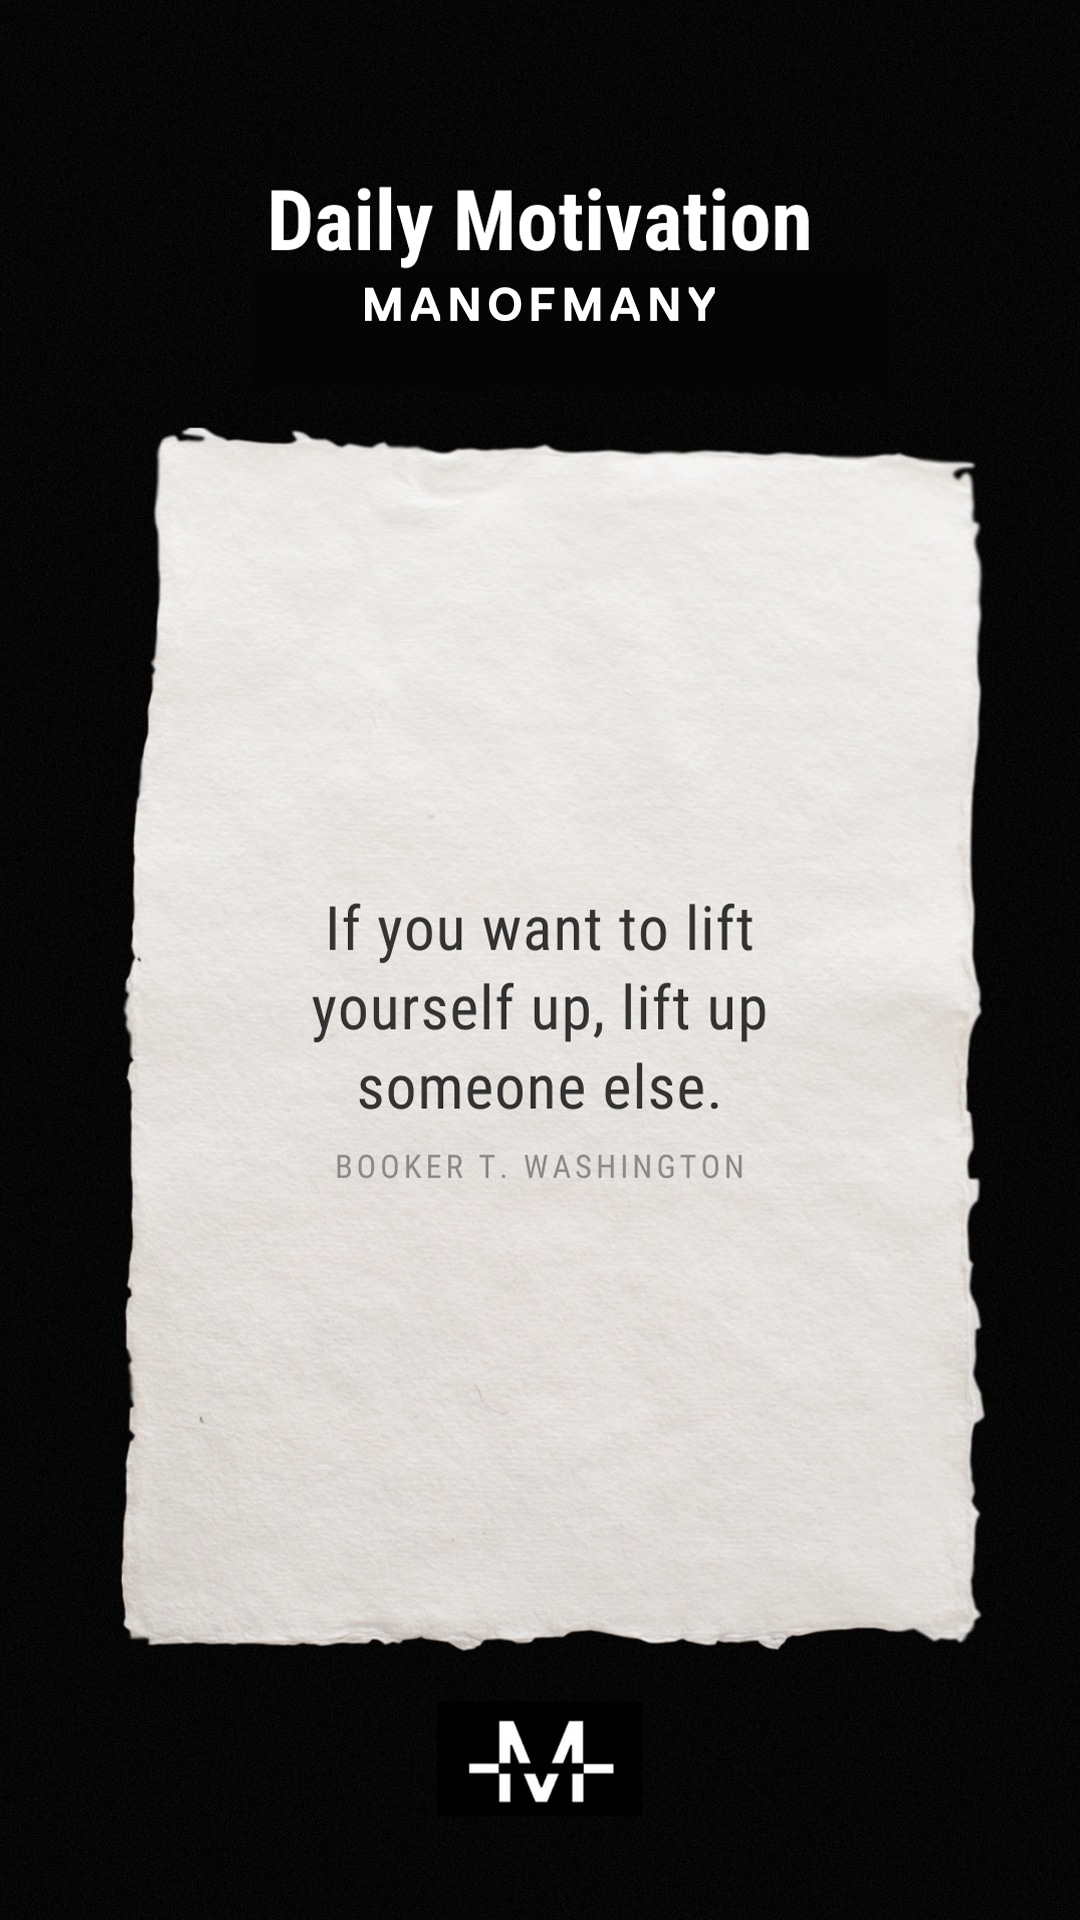 If you want to lift yourself up, lift up someone else. –Booker T. Washington quote